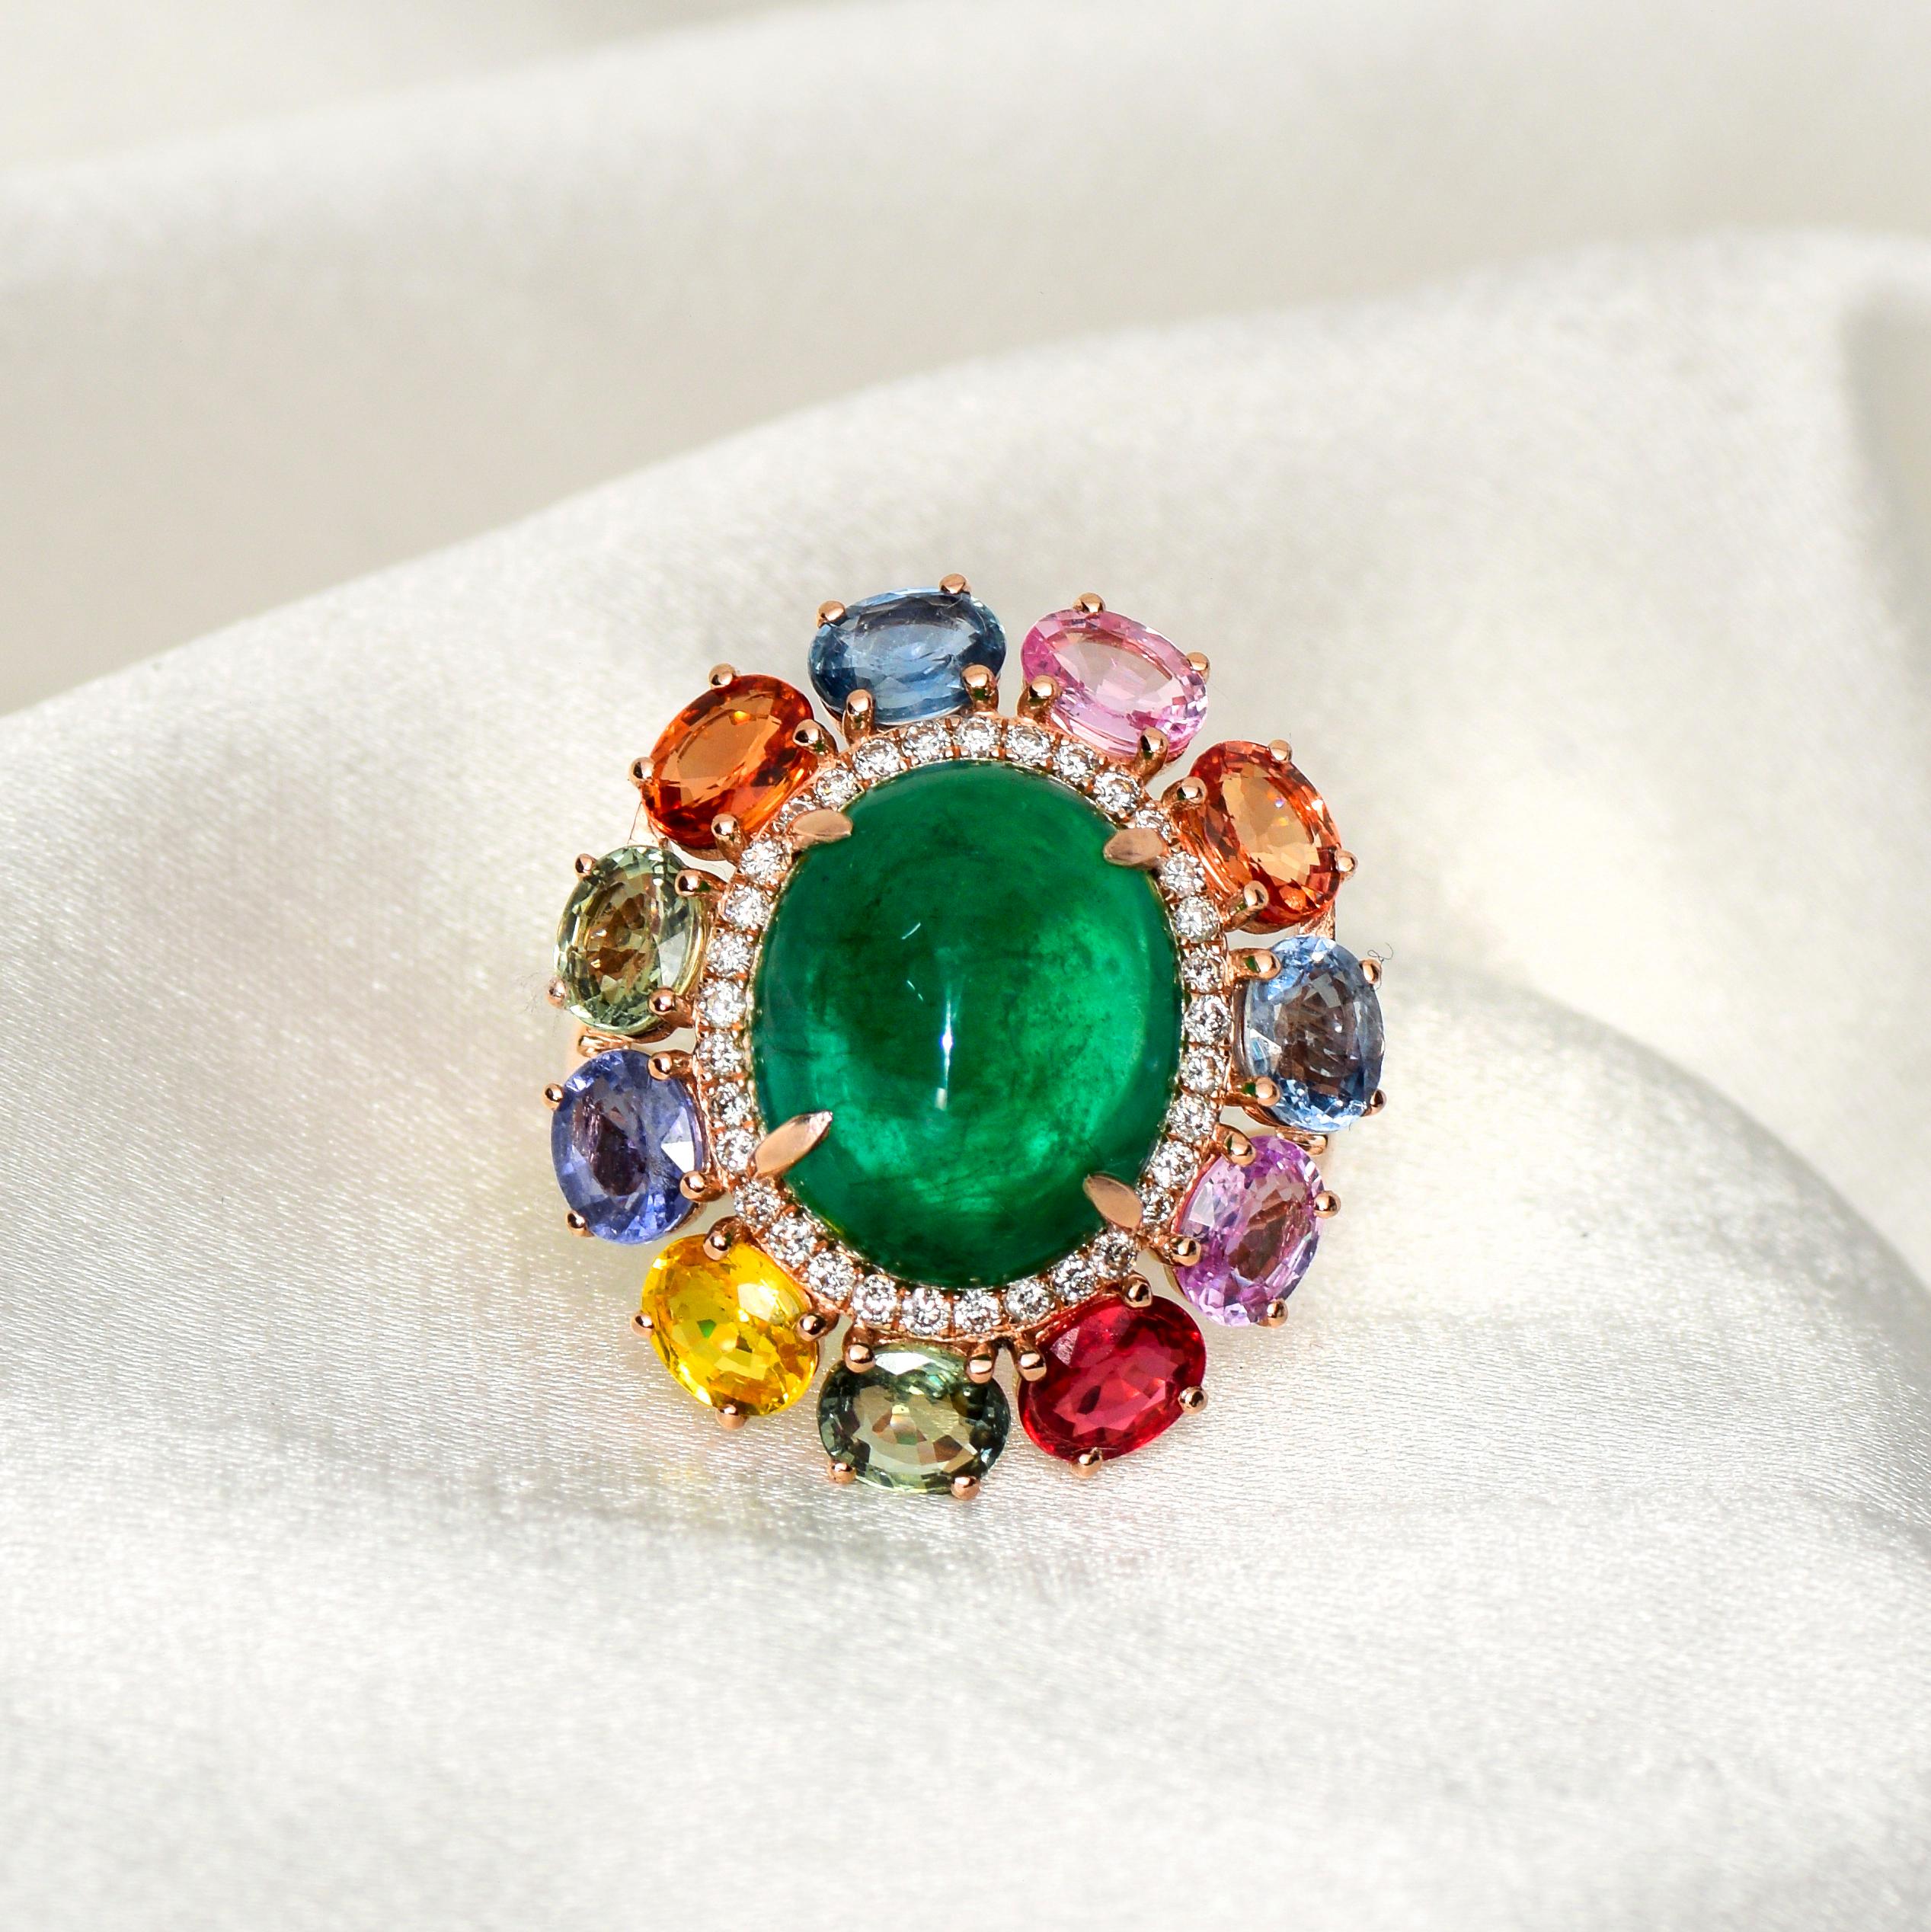 ** One 14K 7.93 Ct Emerald&Sapphires⋄ Antique Art Deco Style Engagement Ring **
An IGI-Certified natural oval cabochon Emerald with beautiful green color weighing 7.93 ct sets on the double halos 14K pink gold band with inner natural FG VS diamonds